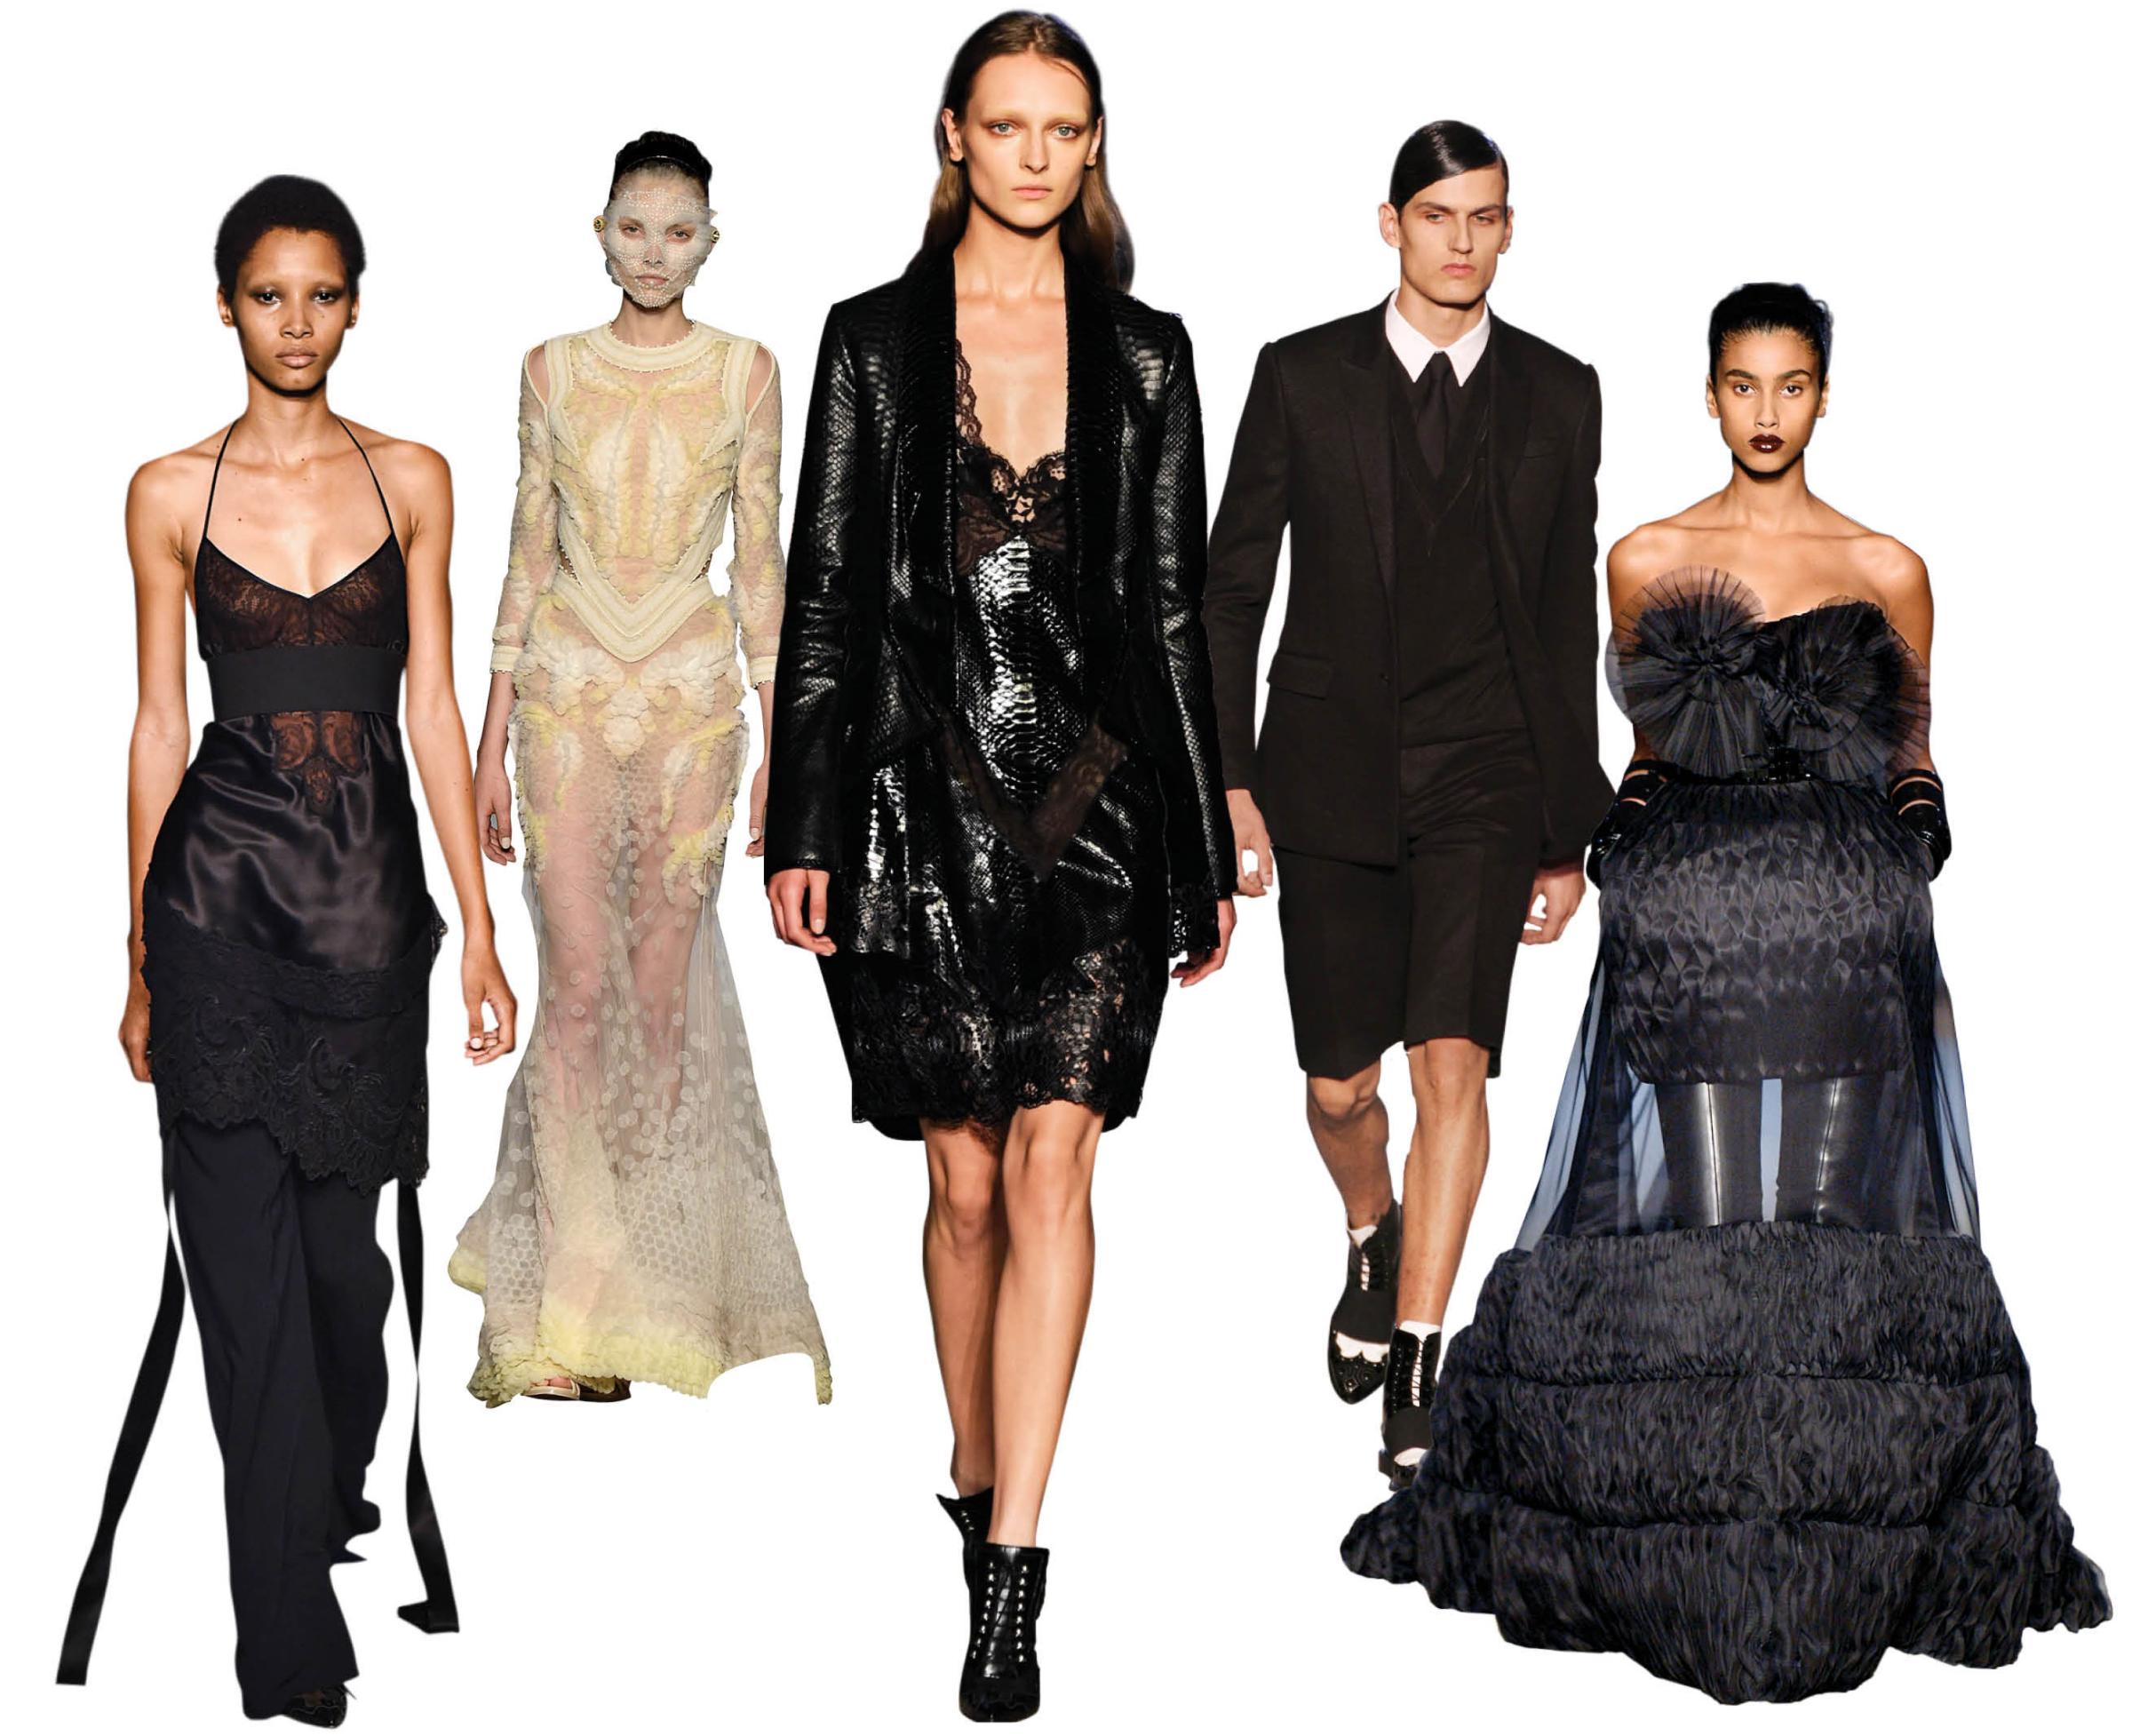 Givenchy's Spring / Summer 2016 show was a tribute to New York City, love and all things Riccardo